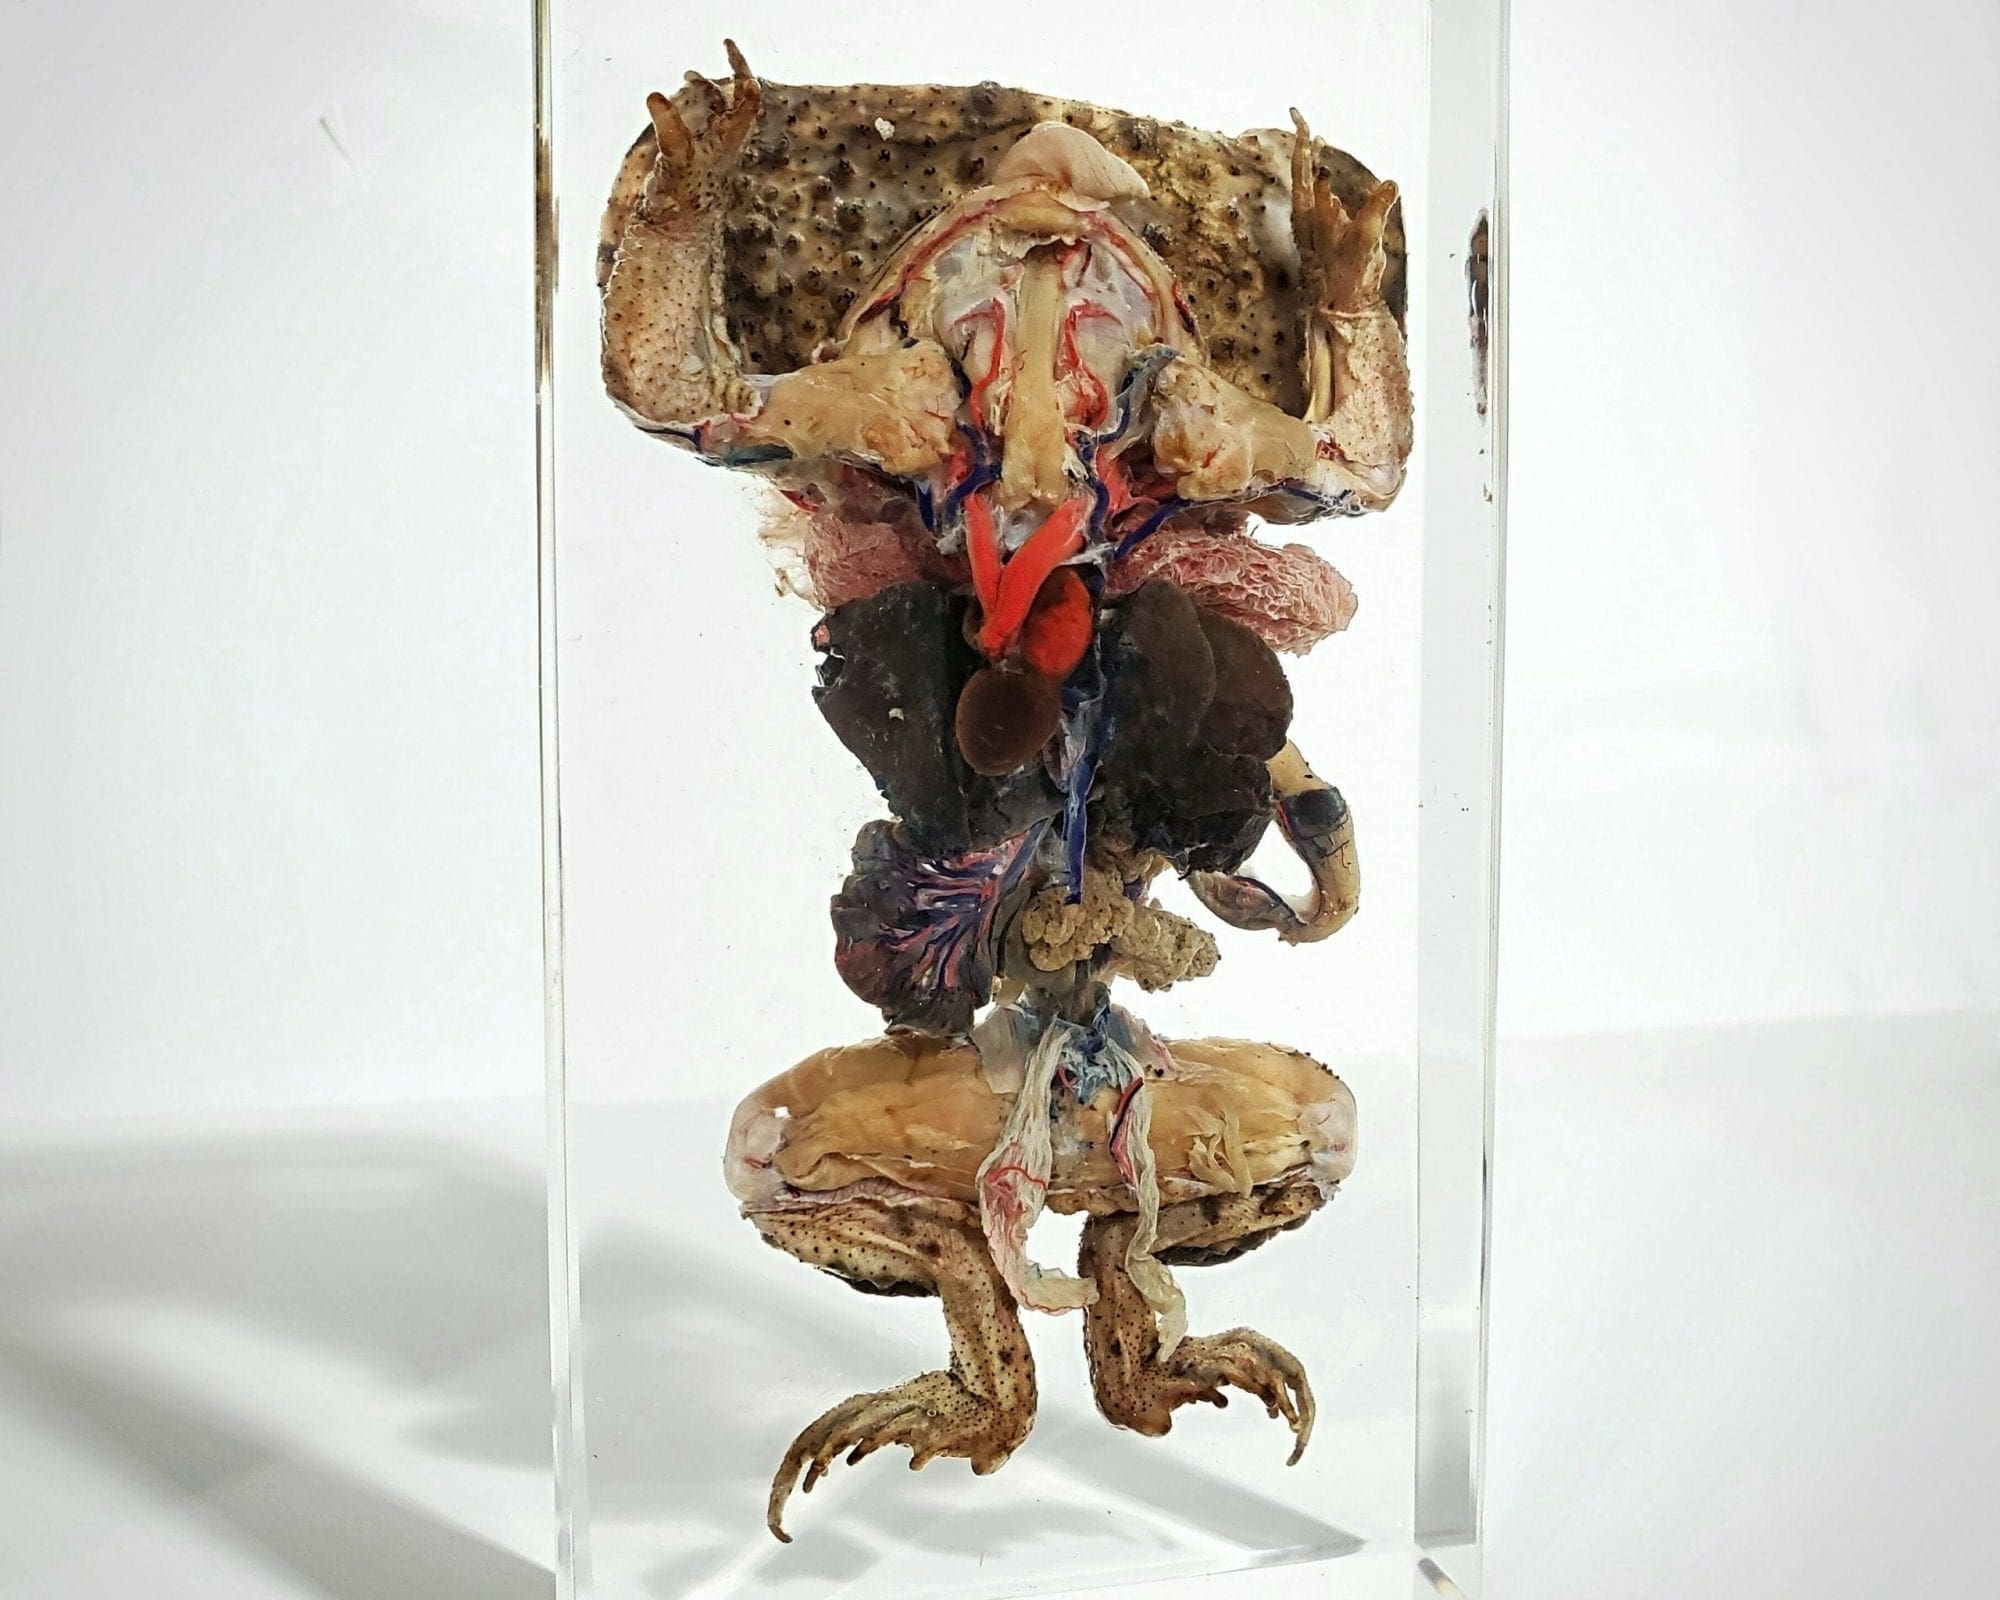 Dissected Toad In Resin, Dissected Frog, Oddities Curiosities, Lucite Specimens